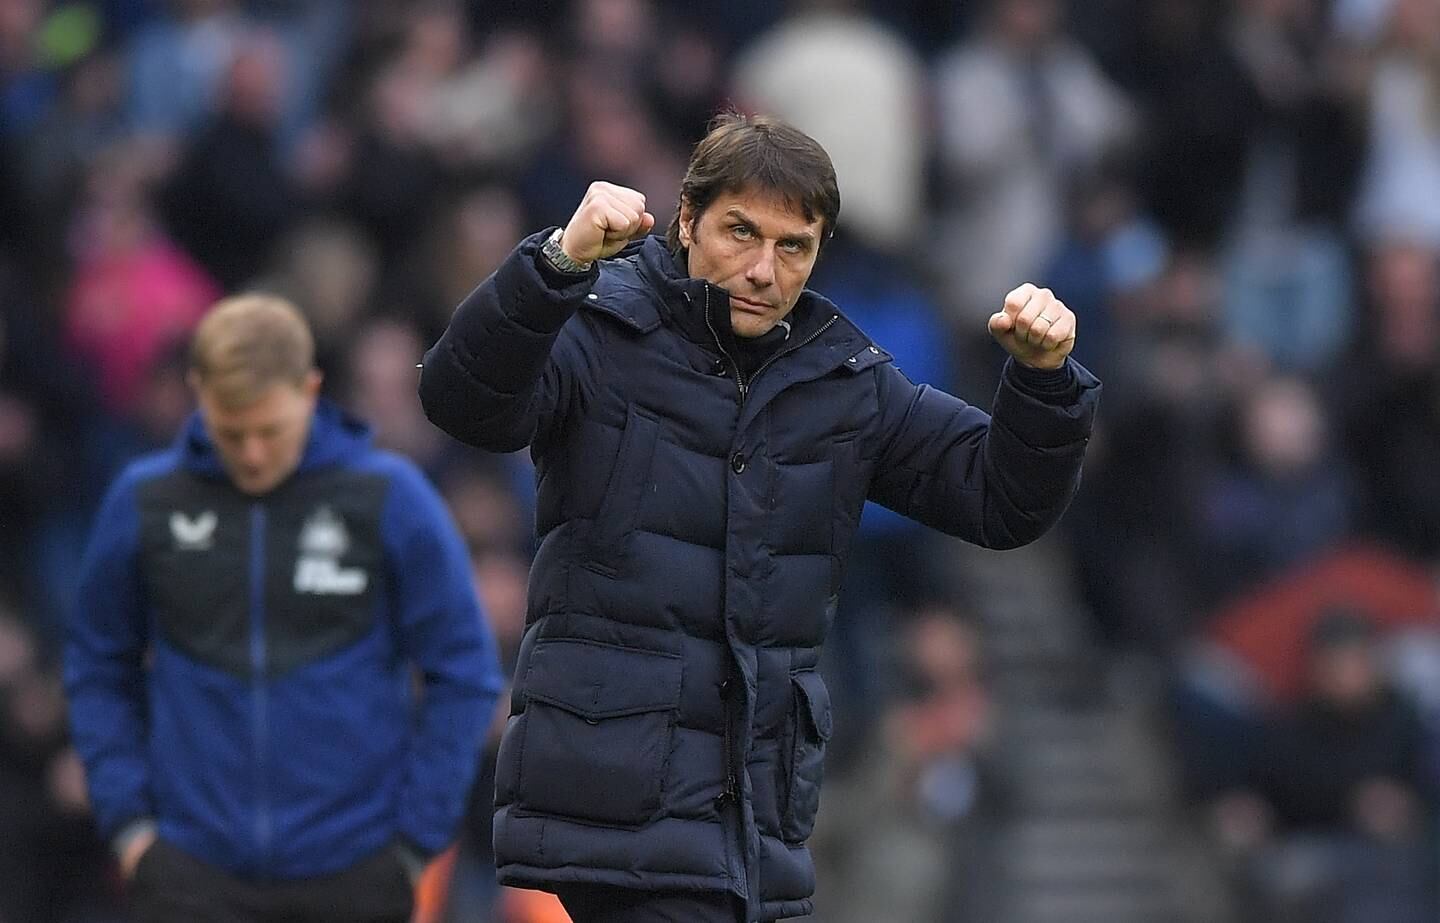 Tottenham manager Antonio Conte after the victory. EPA